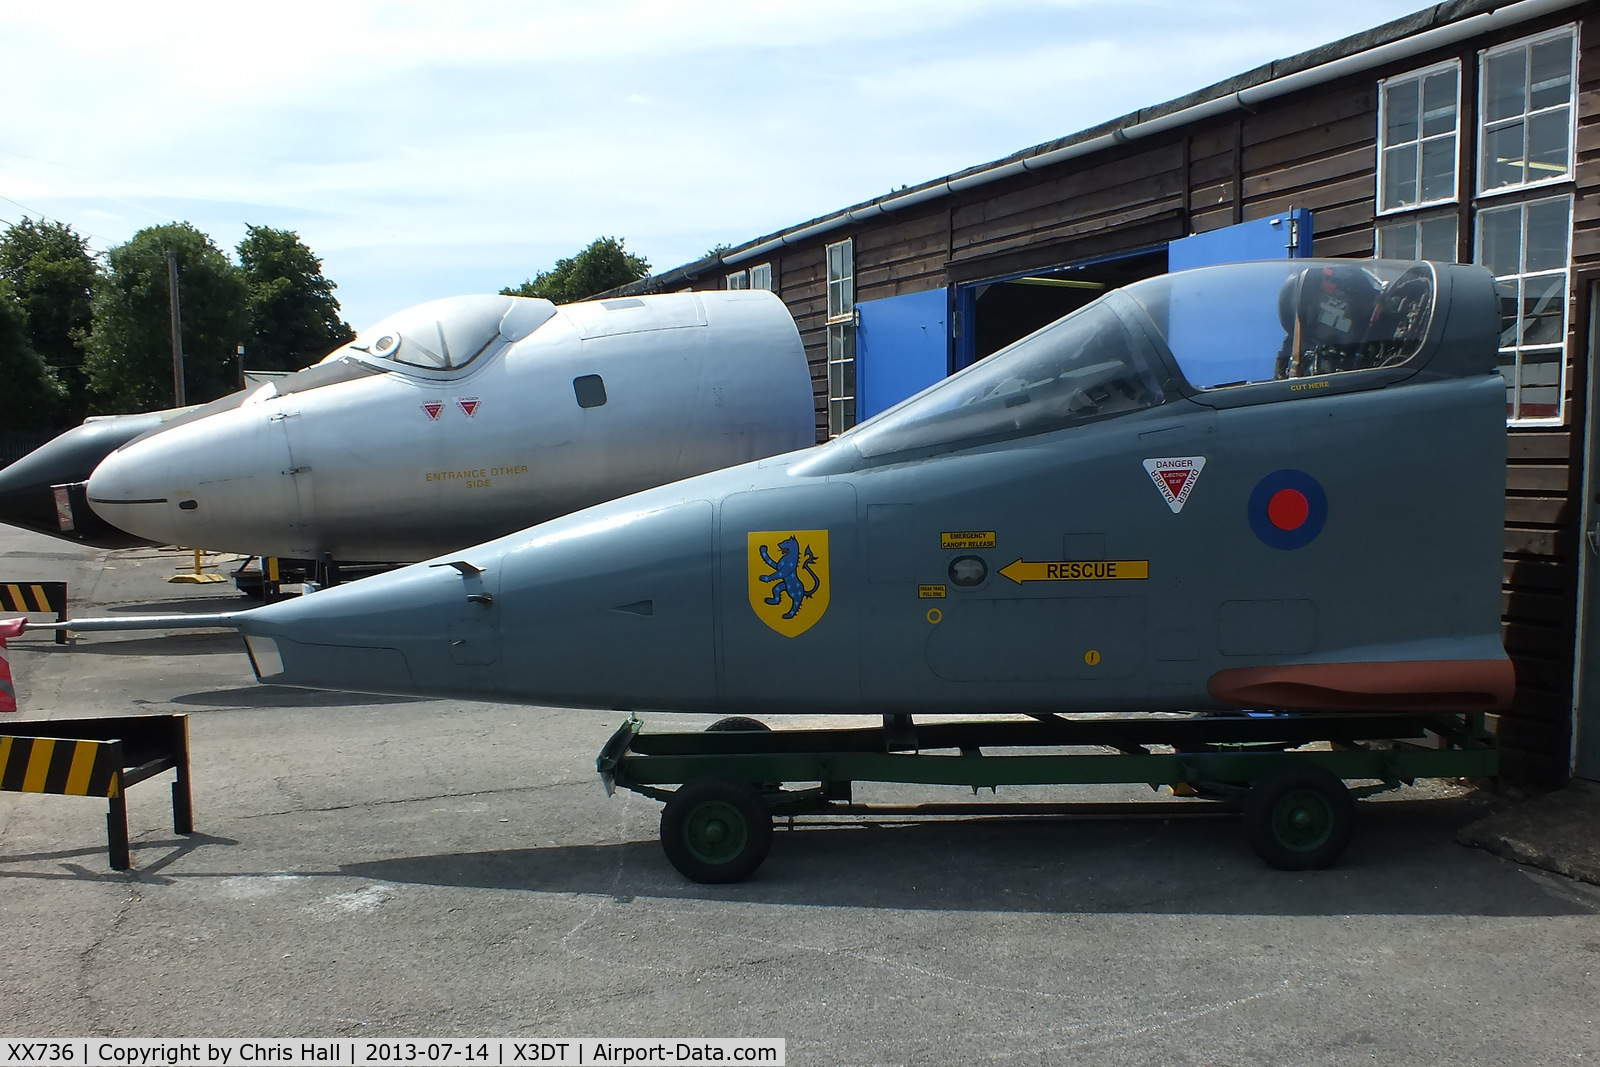 XX736, 1974 Sepecat Jaguar GR.1 C/N S.33, preserved at the South Yorkshire Aircraft Museum, AeroVenture, Doncaster